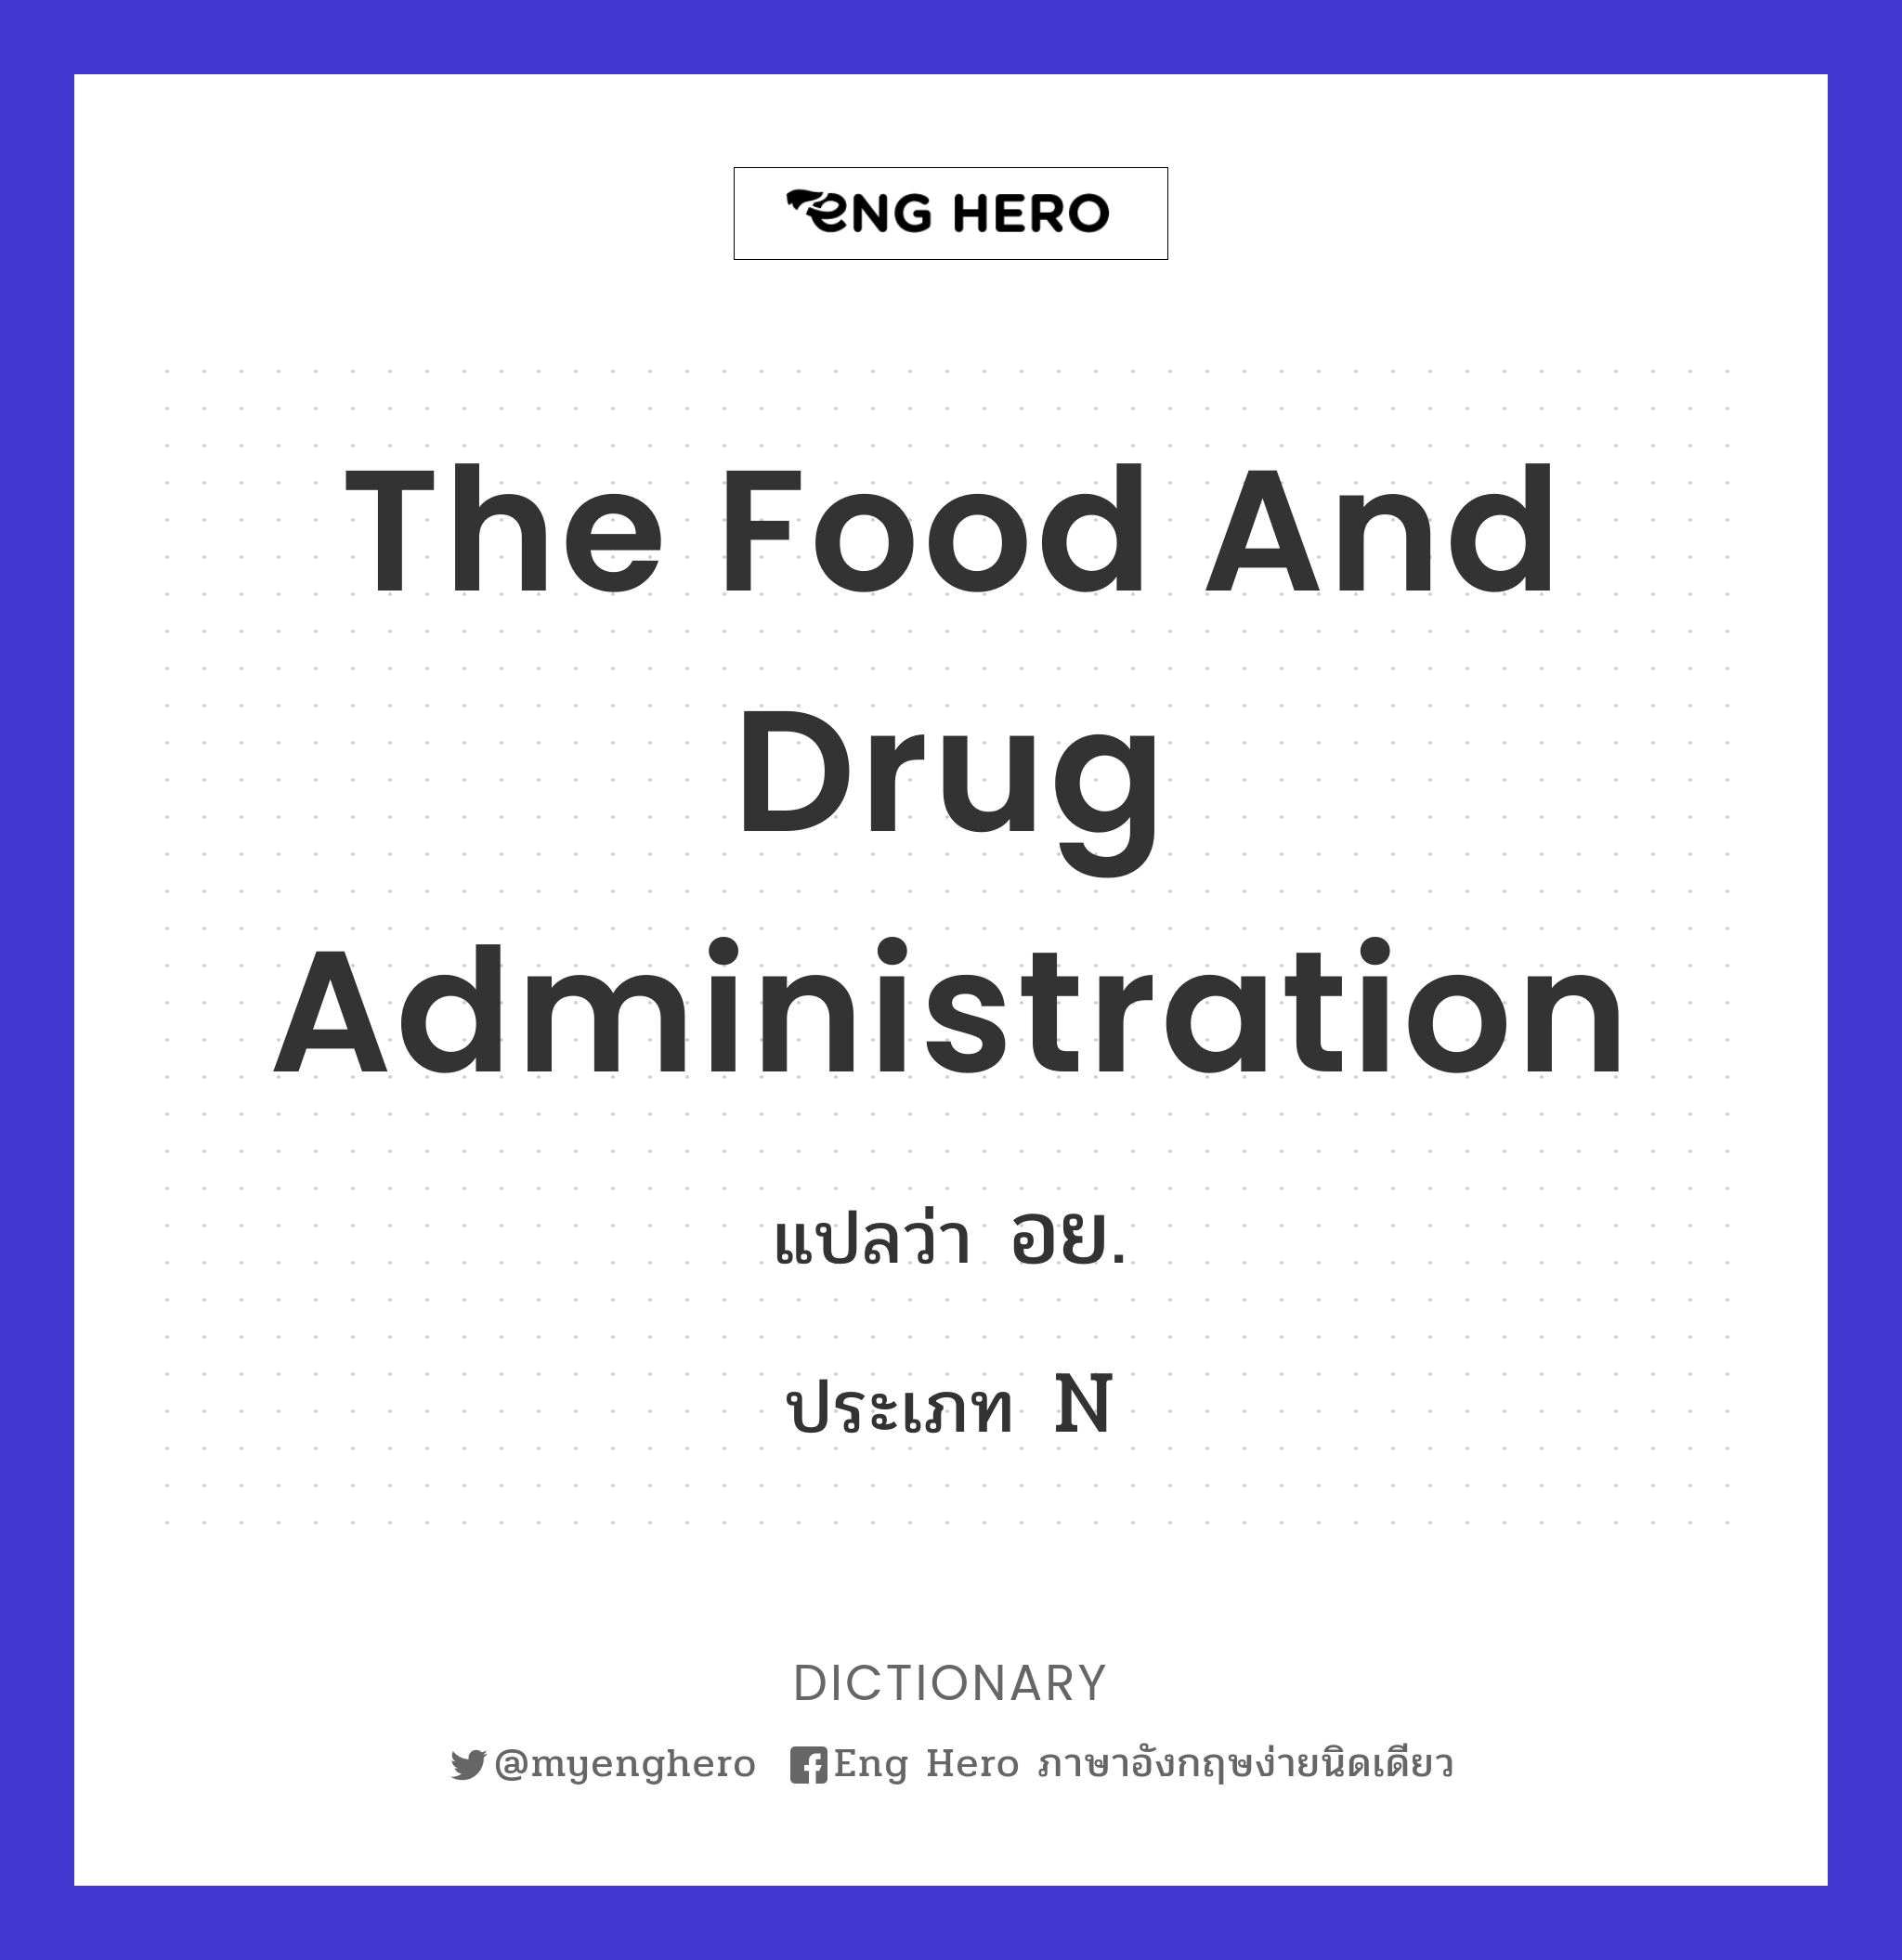 The Food and Drug Administration